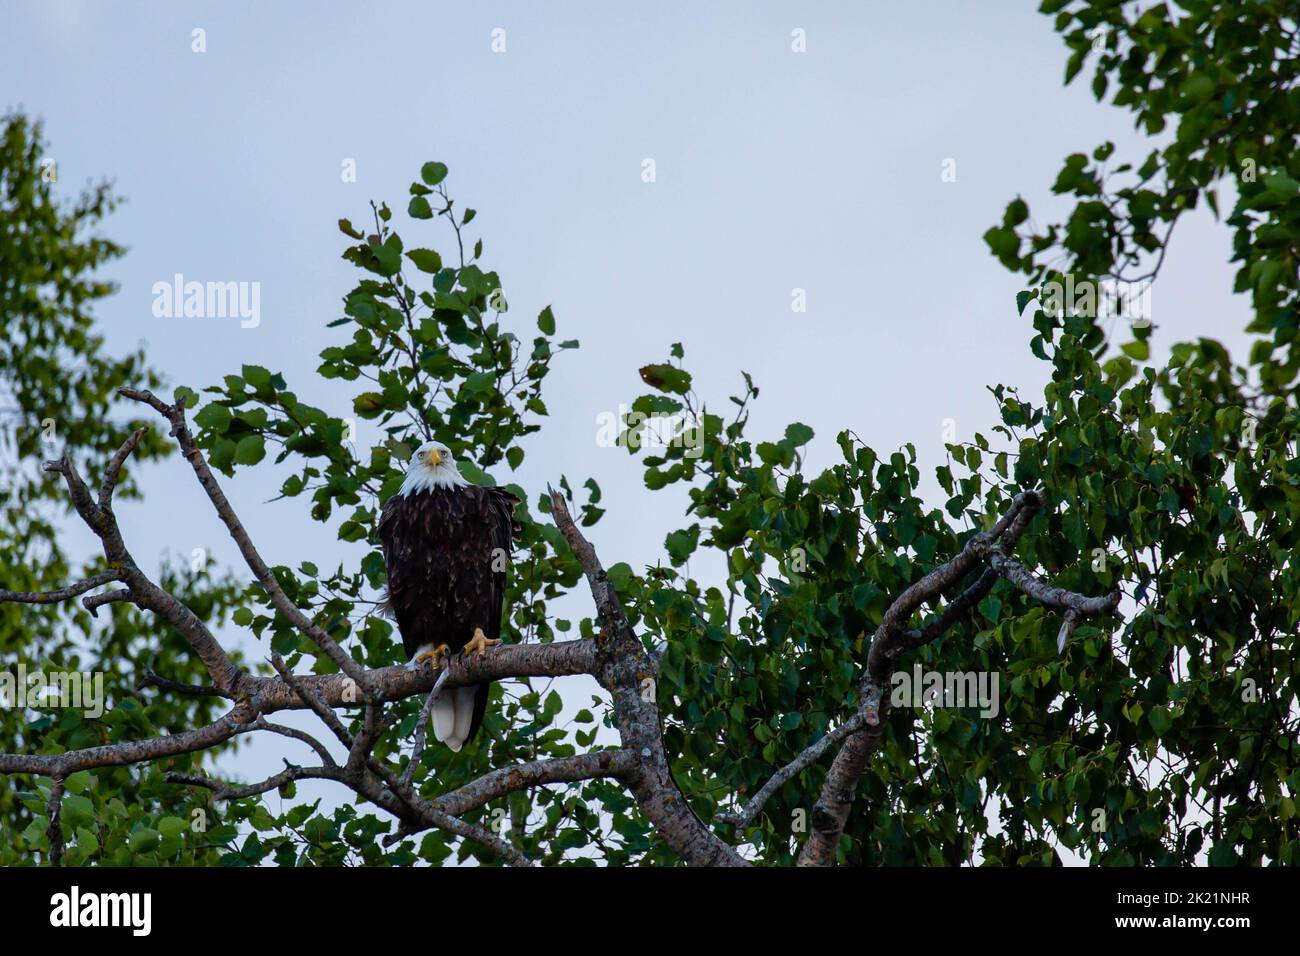 Adult bald eagle (Haliaeetus leucocephalus) perched in a tree in northern Wisconsin, horizontal Stock Photo